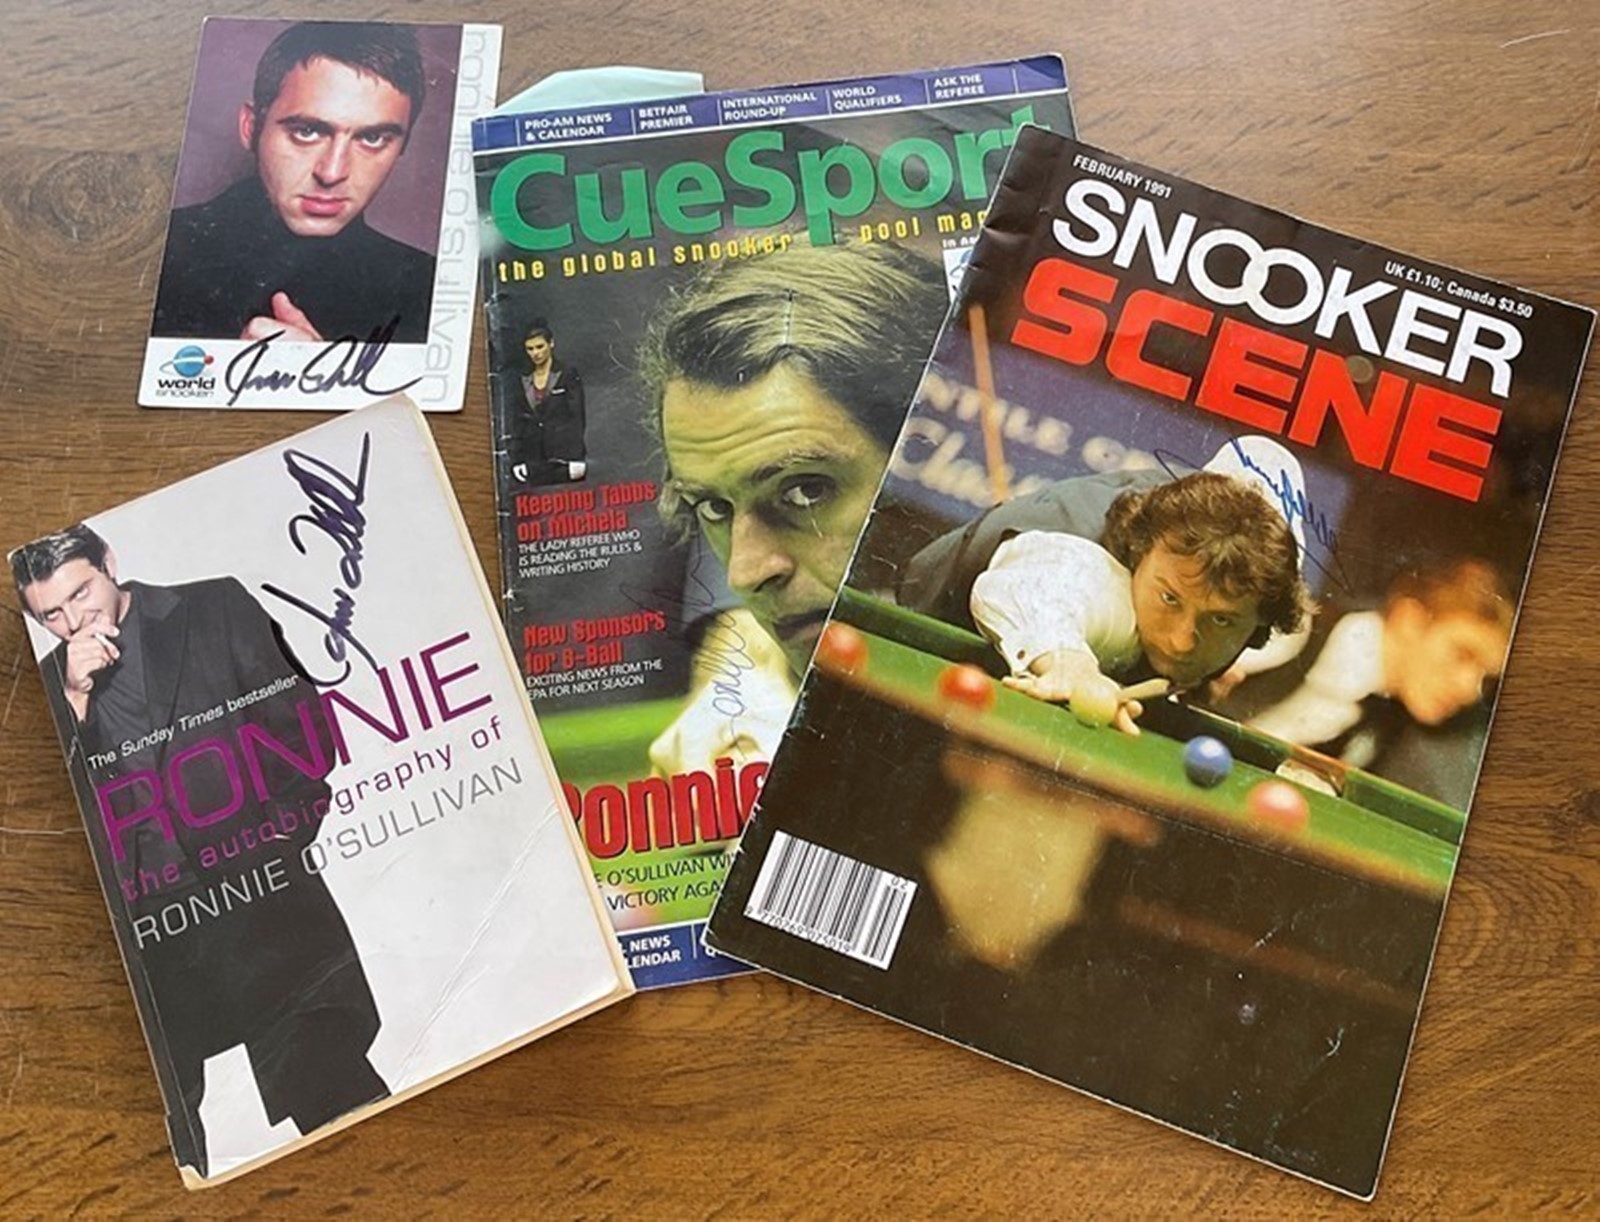 Snooker collection includes 4 fantastic pieces of signed memorabilia from legends Ronnie O'Sullivan,